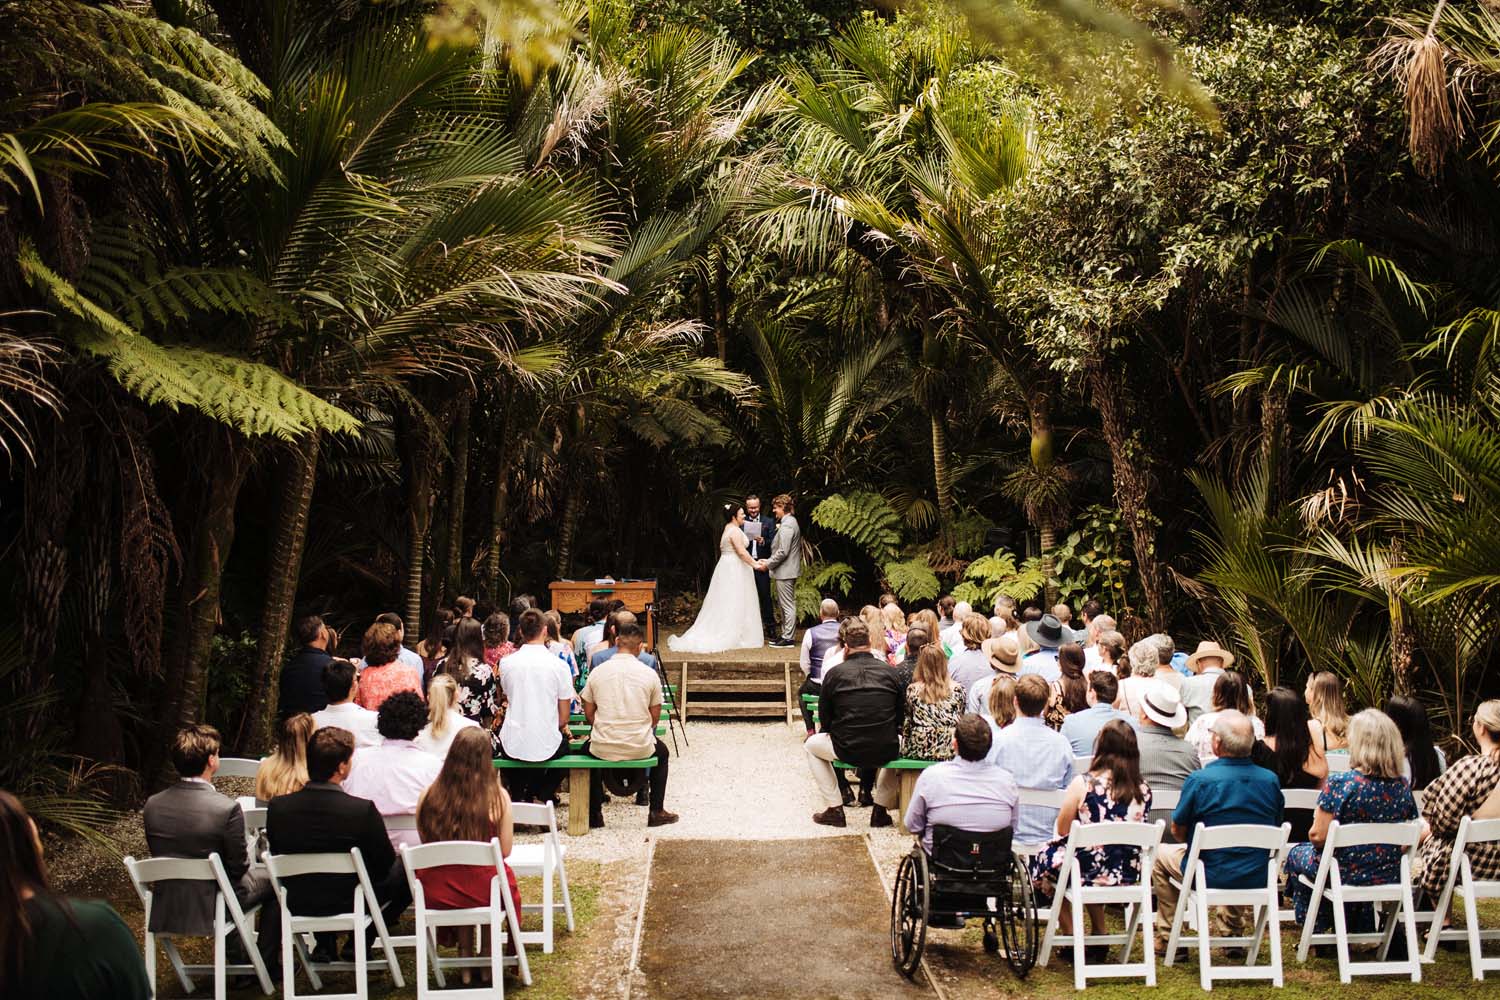 Tying the knot in Port Waikato